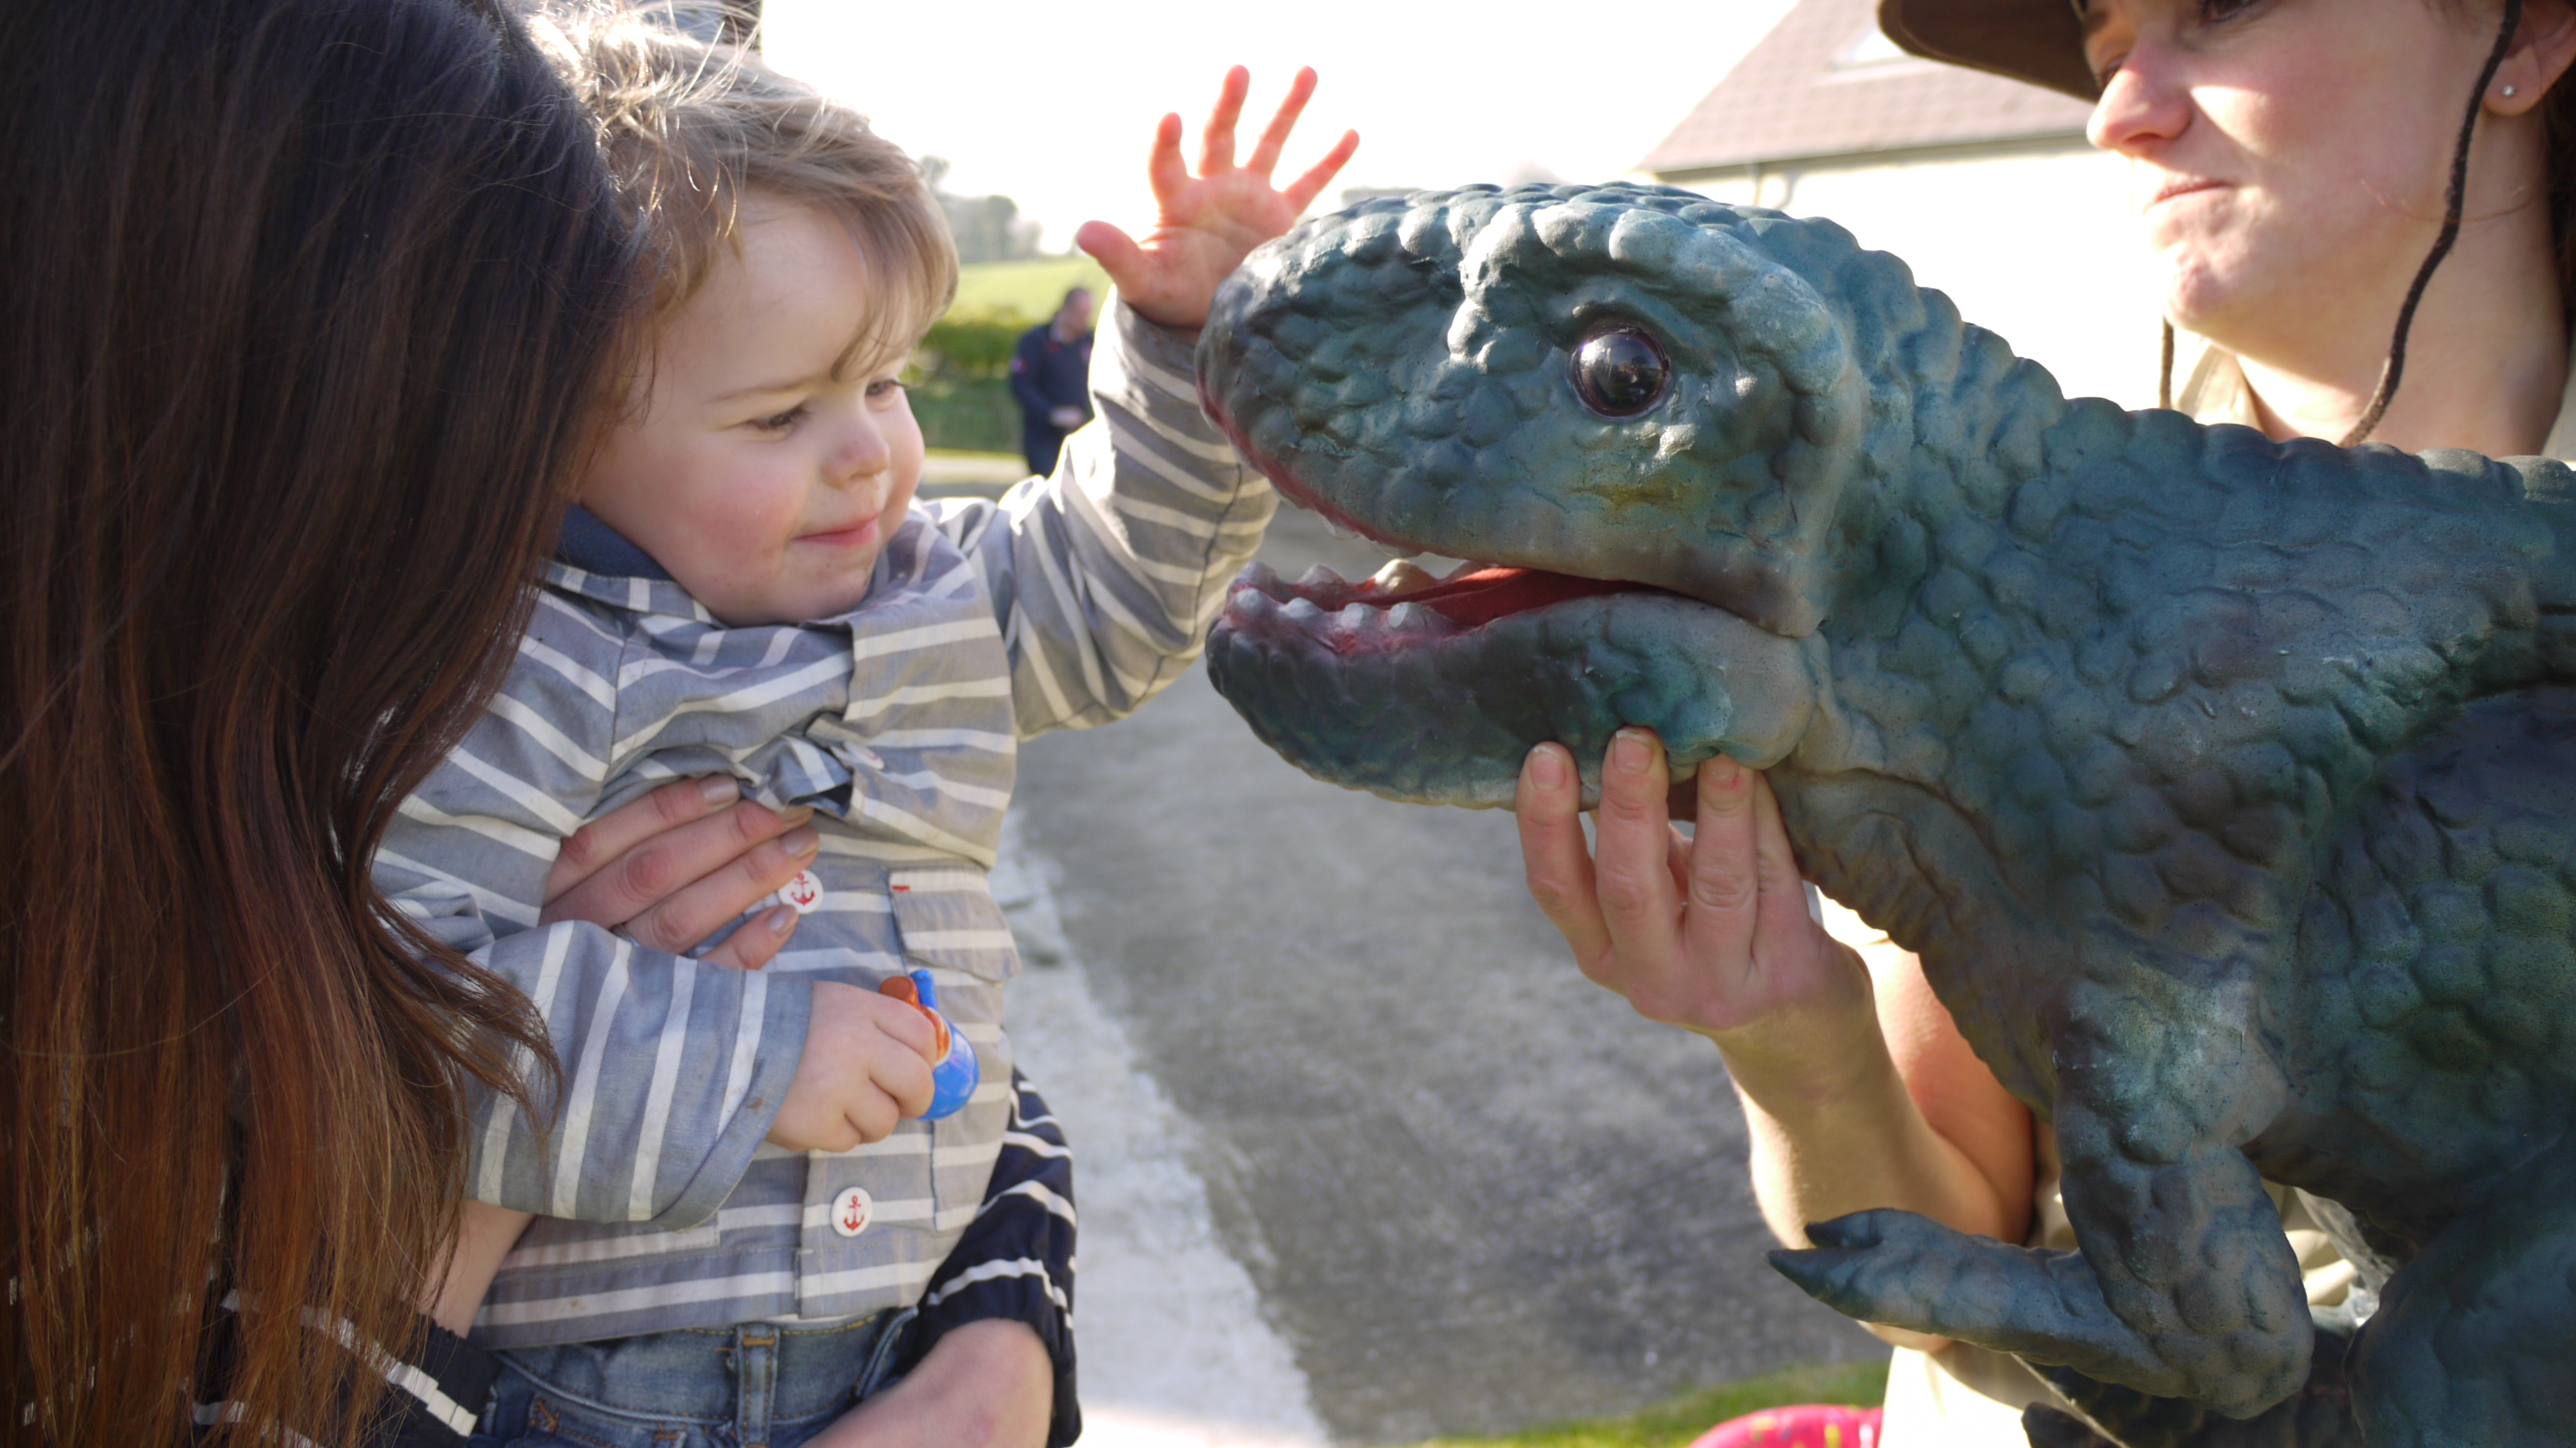 Meeting the baby T-Rex